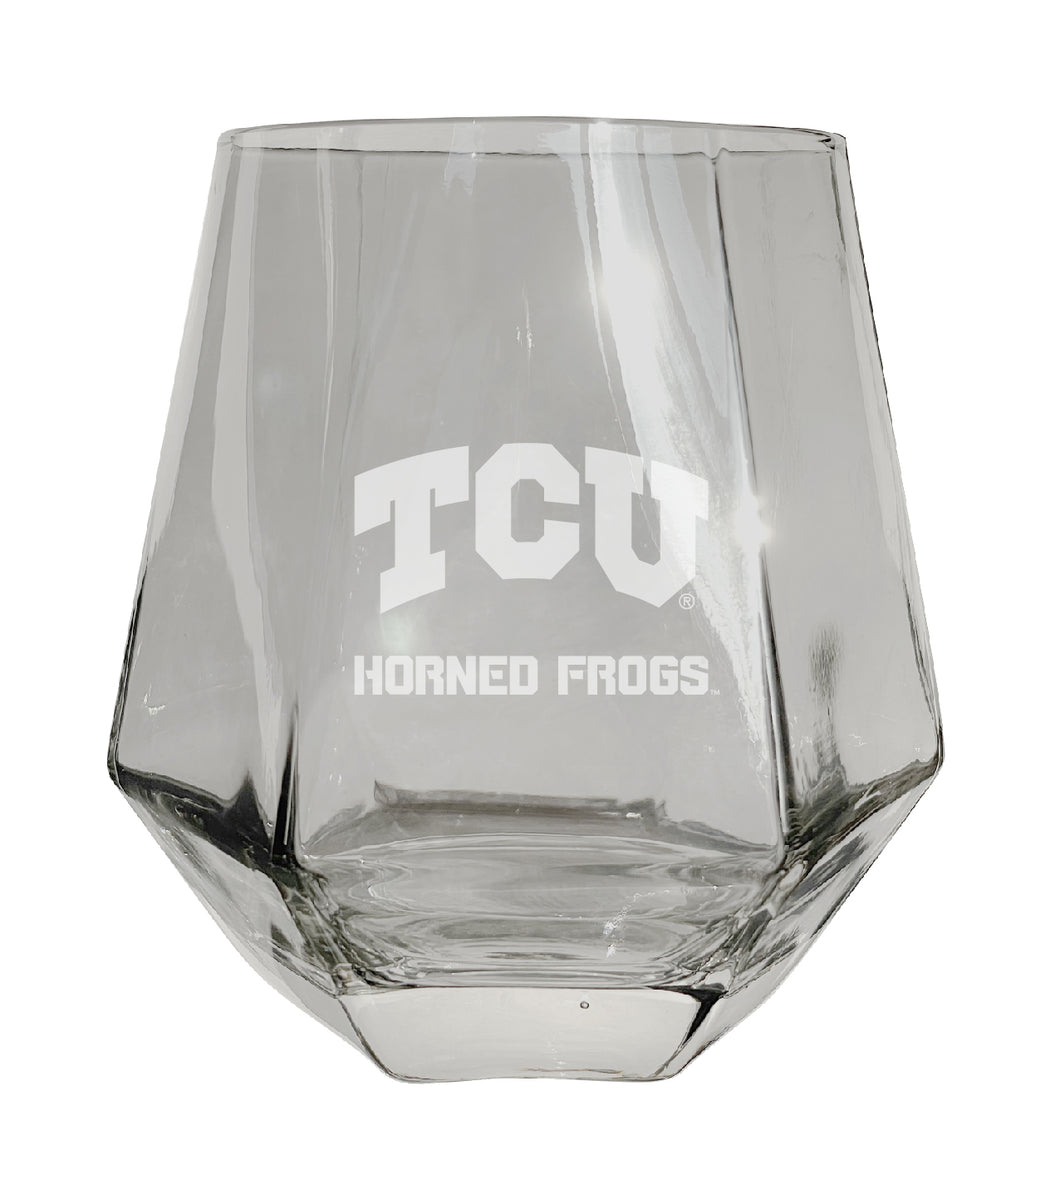 Texas Christian University Tigers Etched Diamond Cut 10 oz Stemless Wine Glass - NCAA Licensed